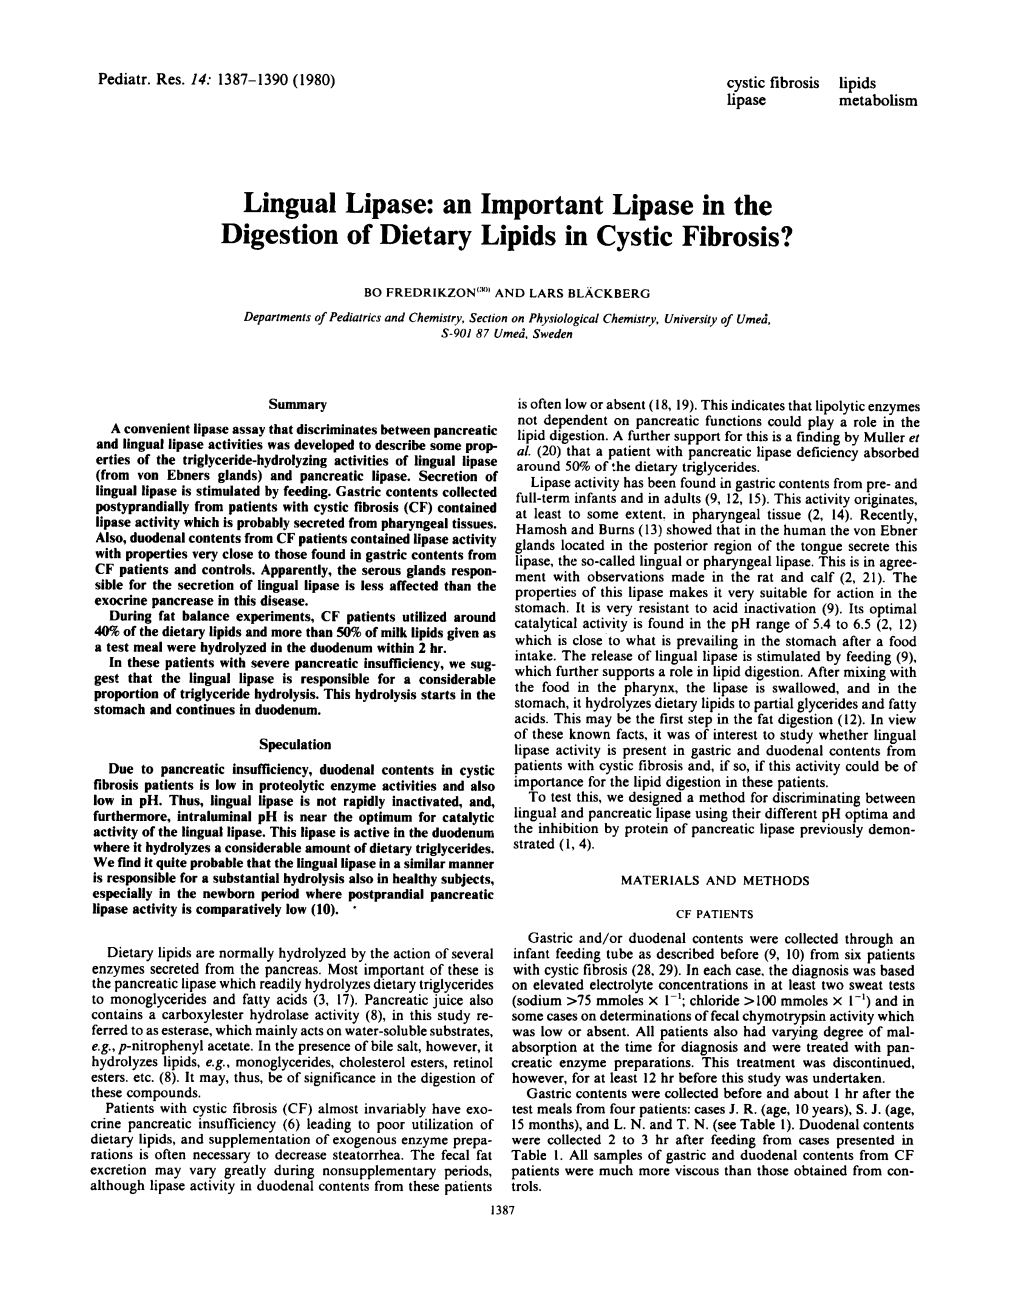 Lingual Lipase: an Important Lipase in the Digestion of Dietary Lipids in Cystic Fibrosis?